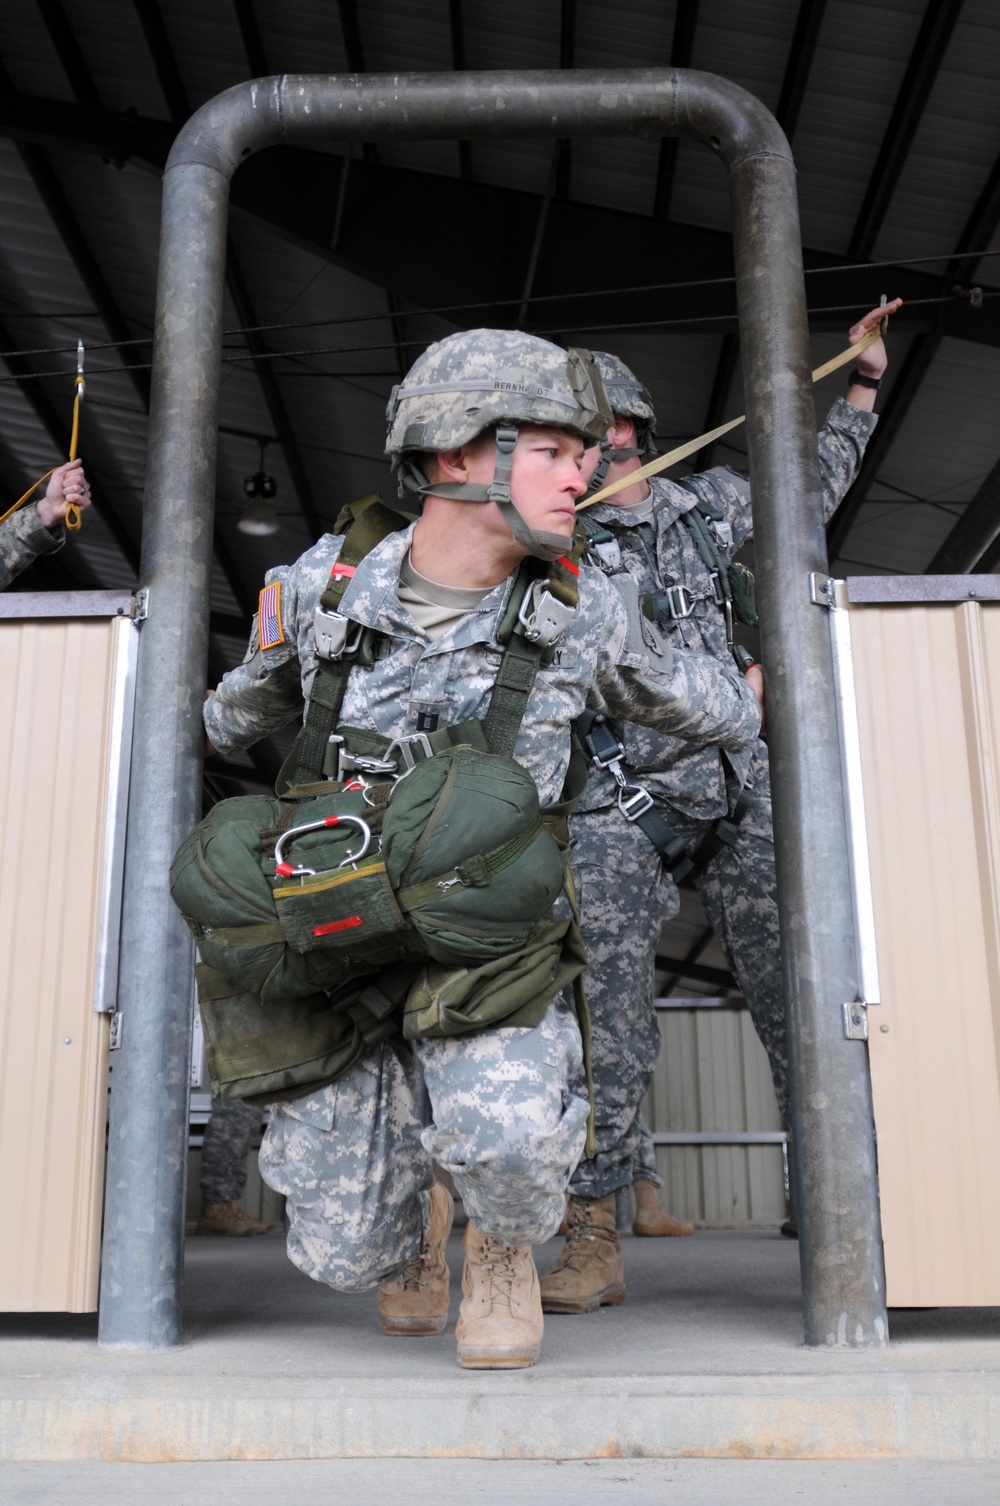 Fort Bragg welcomes International Fellows, promotes professional education of allies